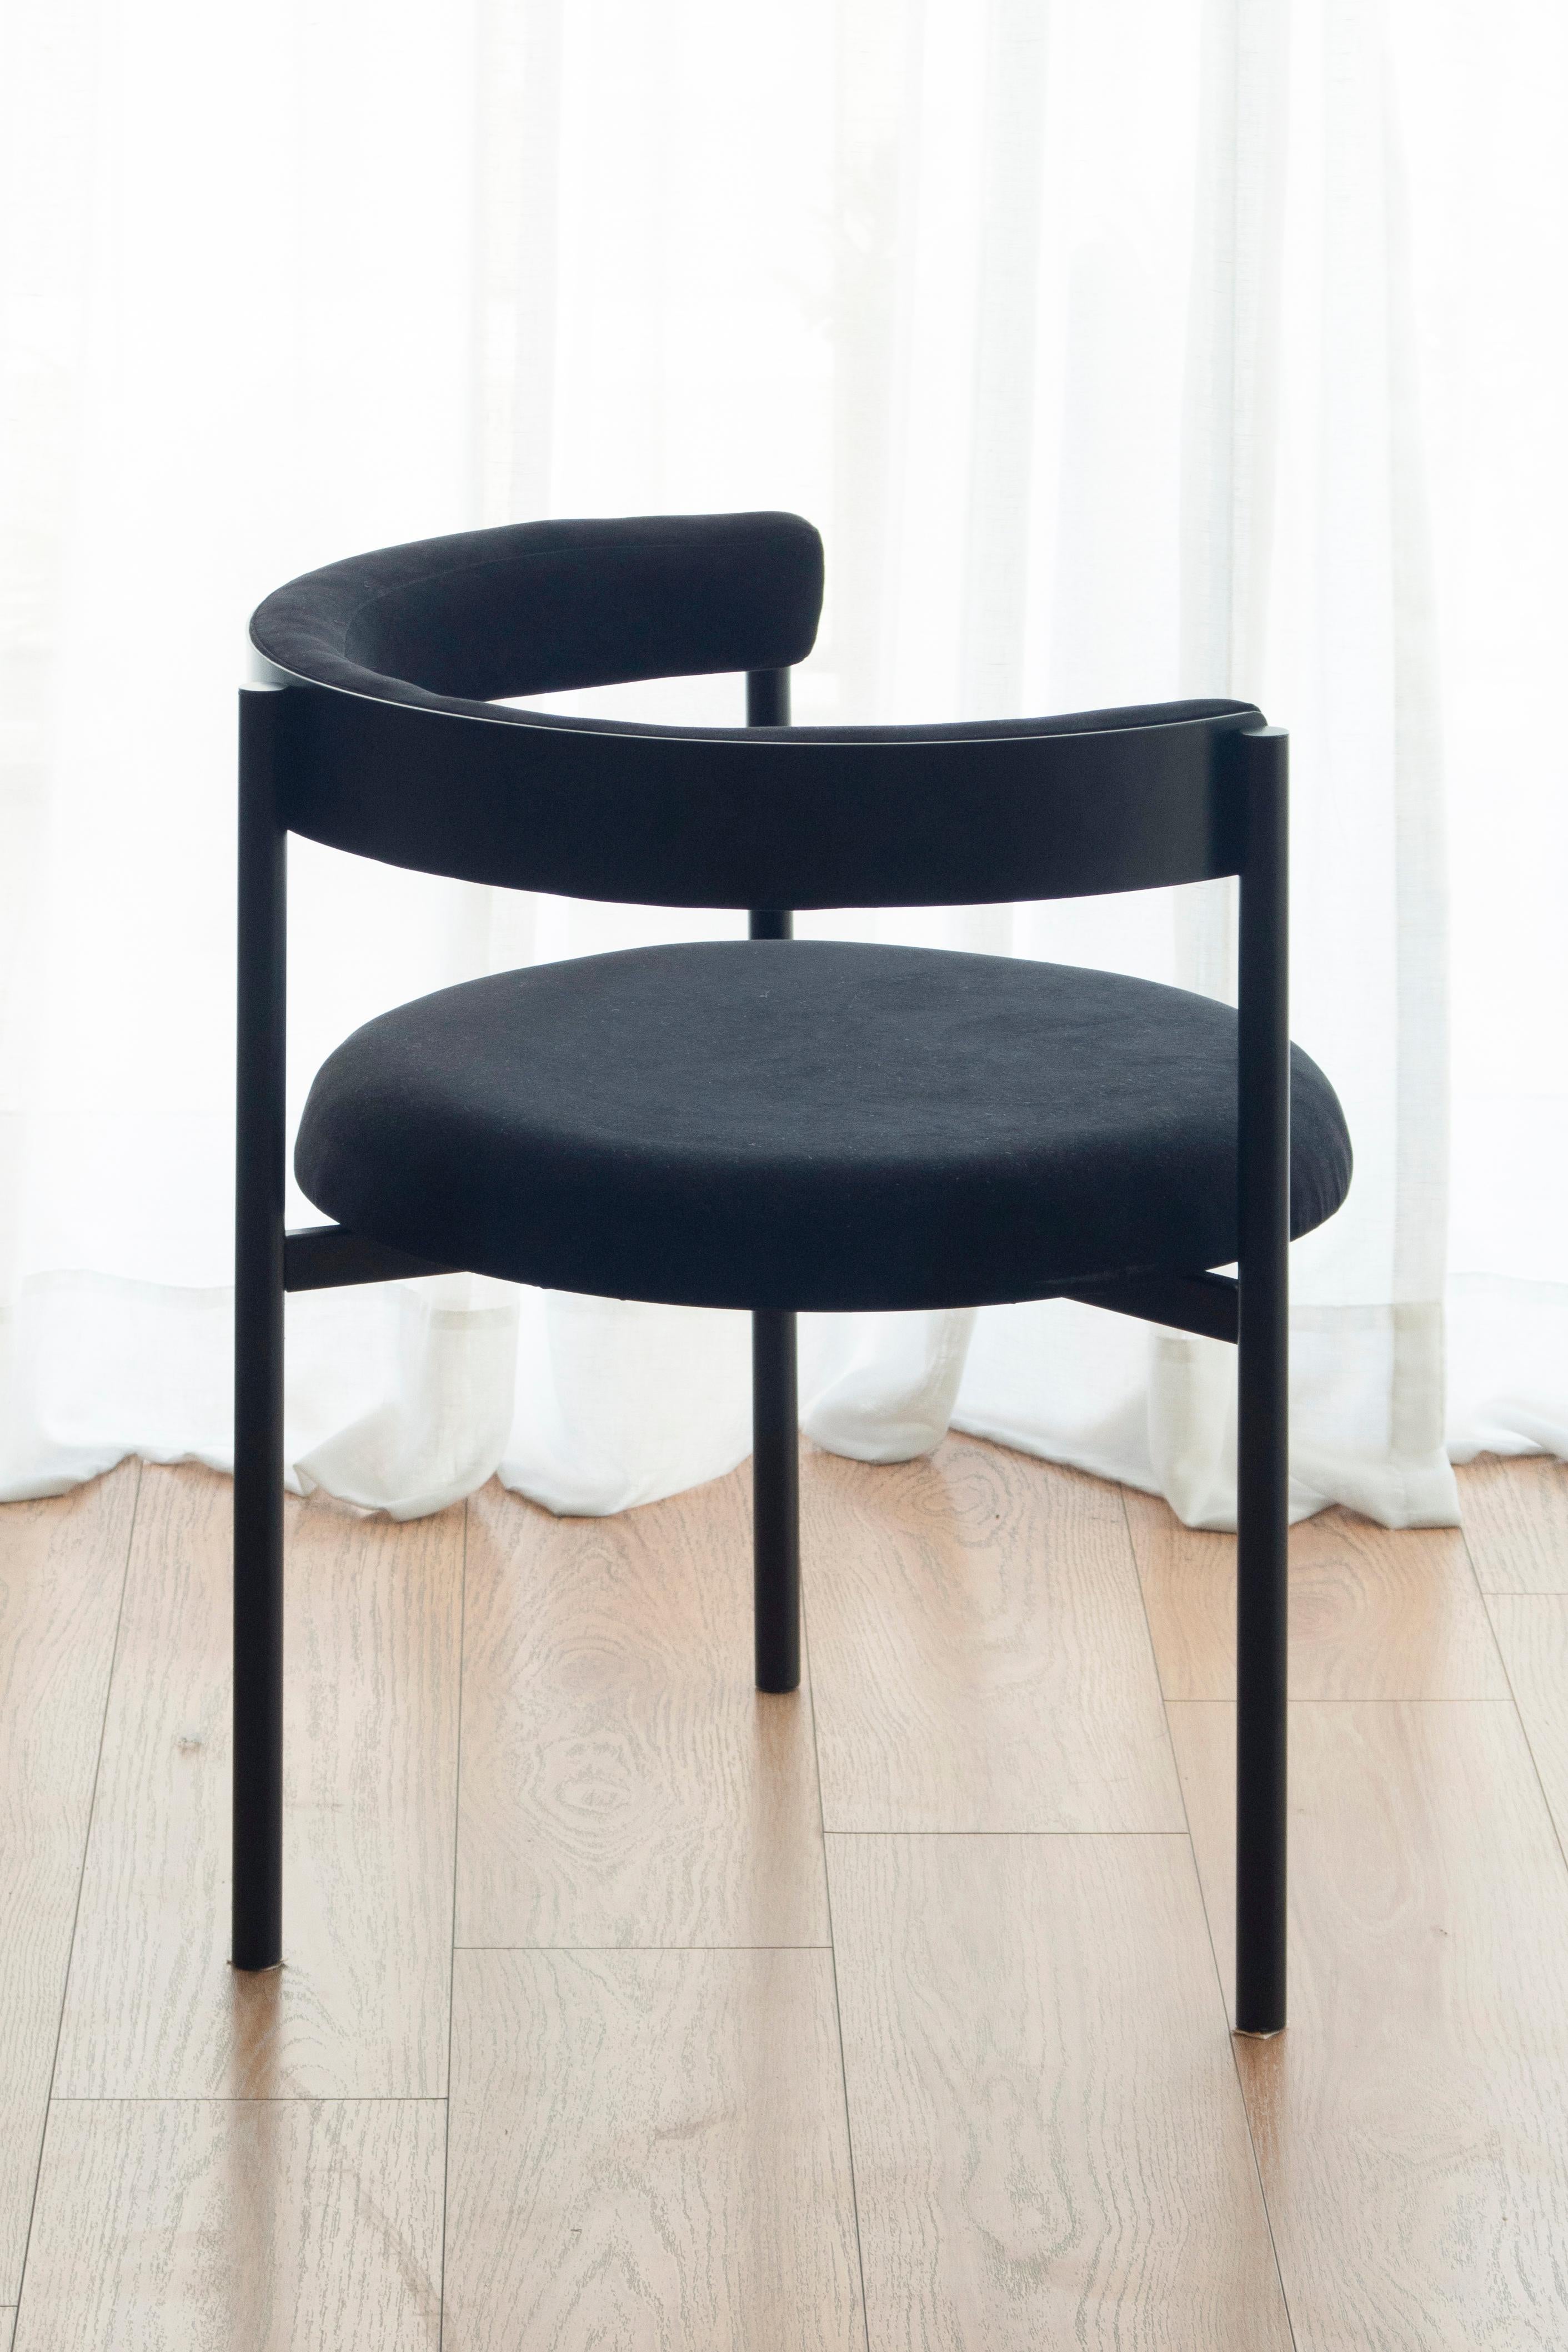 Argentine Set of 2 Aro Chairs, Black by Ries For Sale